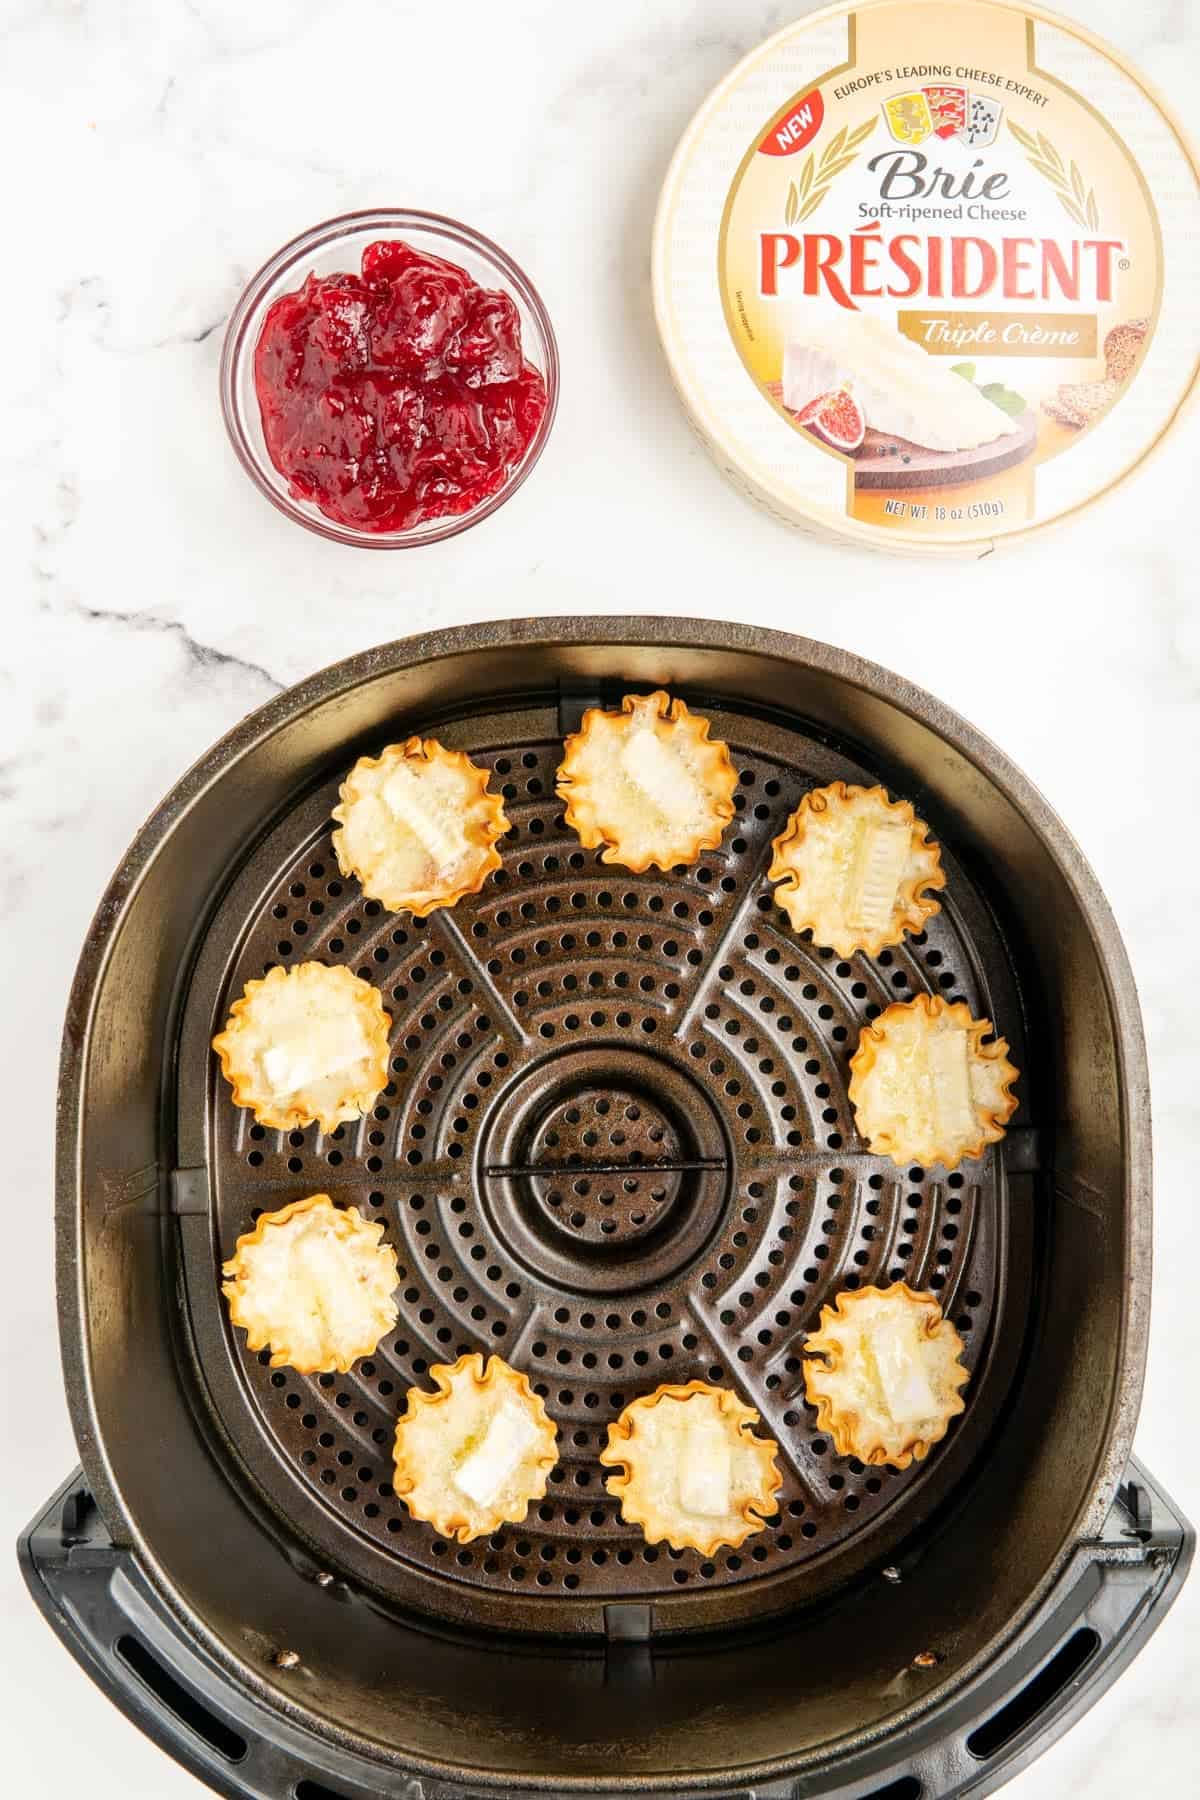 Phyllo shells filled with melted brie cheese in an air fryer basket.